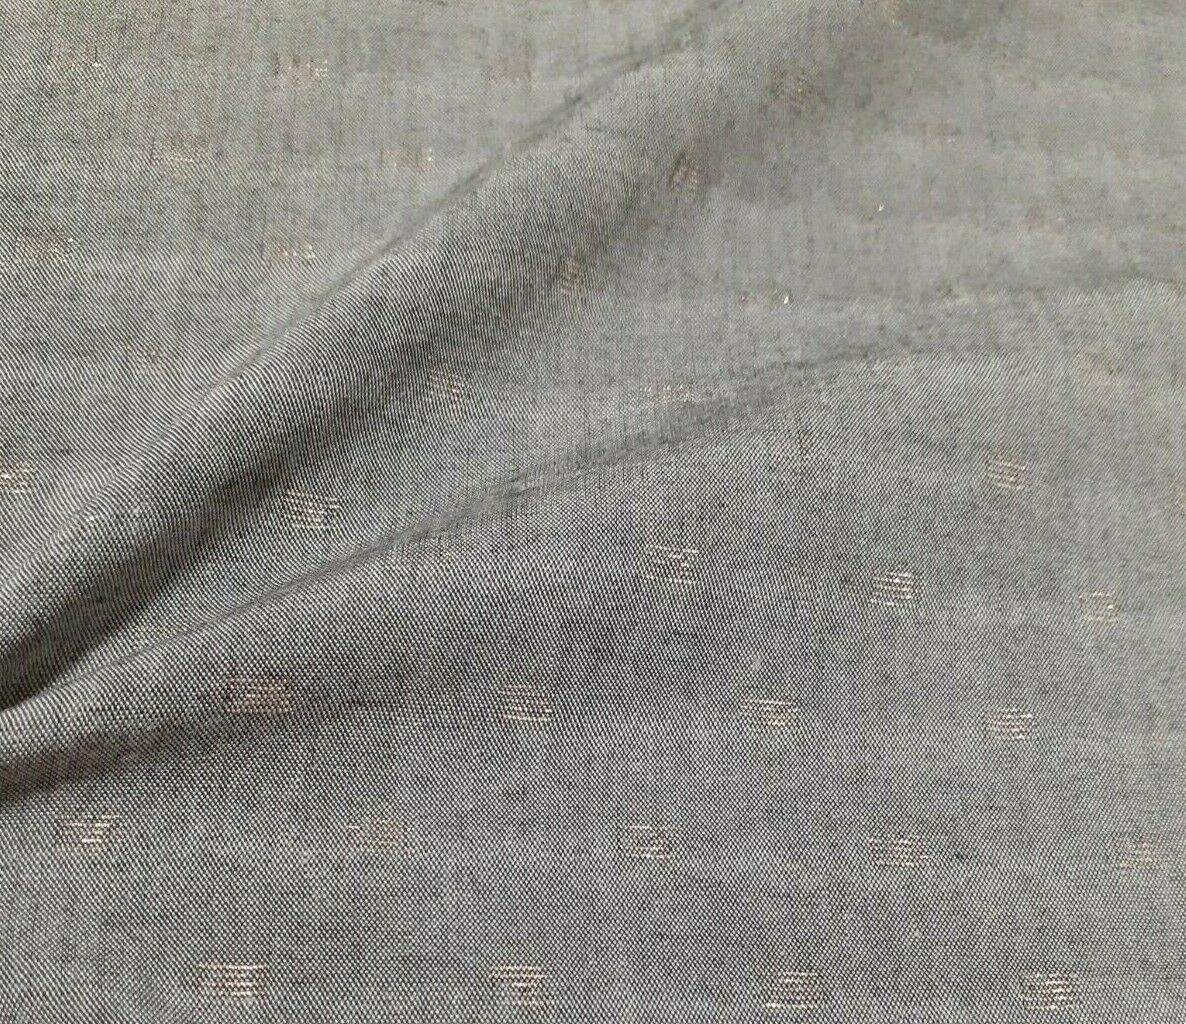 VISCOSE LUREX FABRIC SMALL SHINY FIGURED - SOLD BY THE METRE